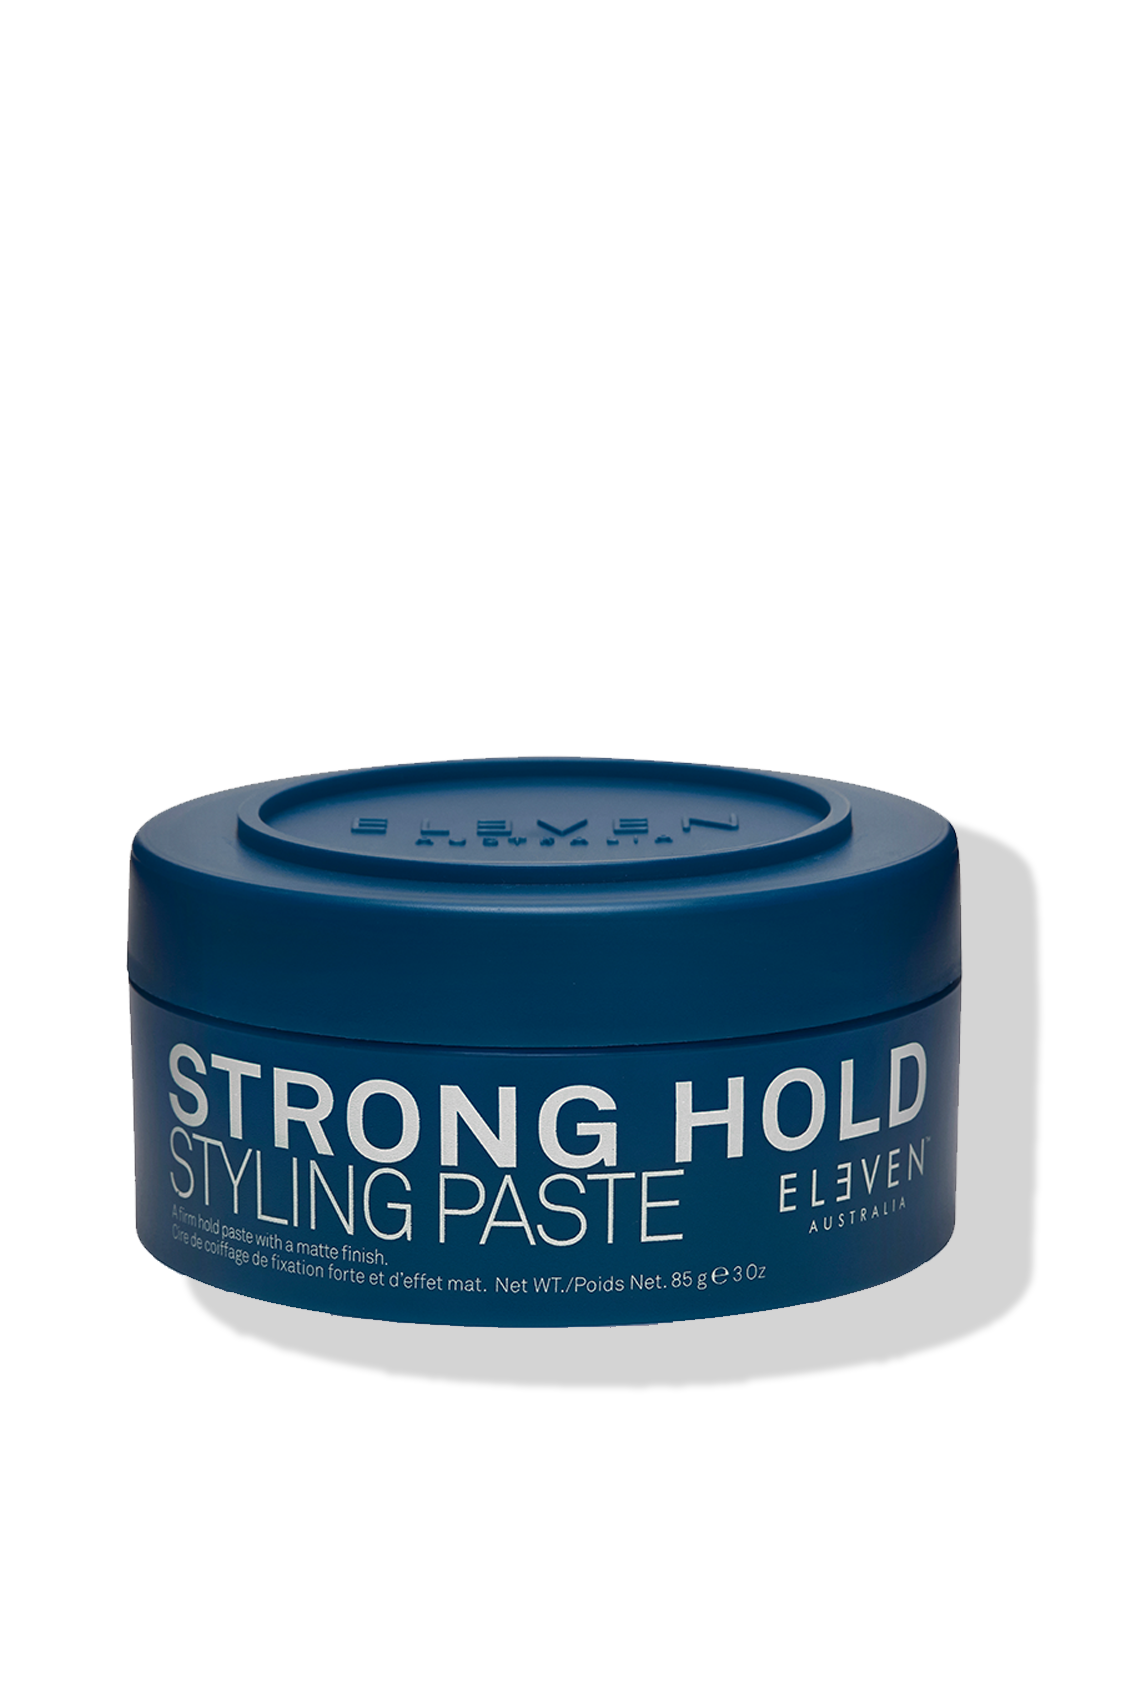 Eleven Australia strong hold styling paste